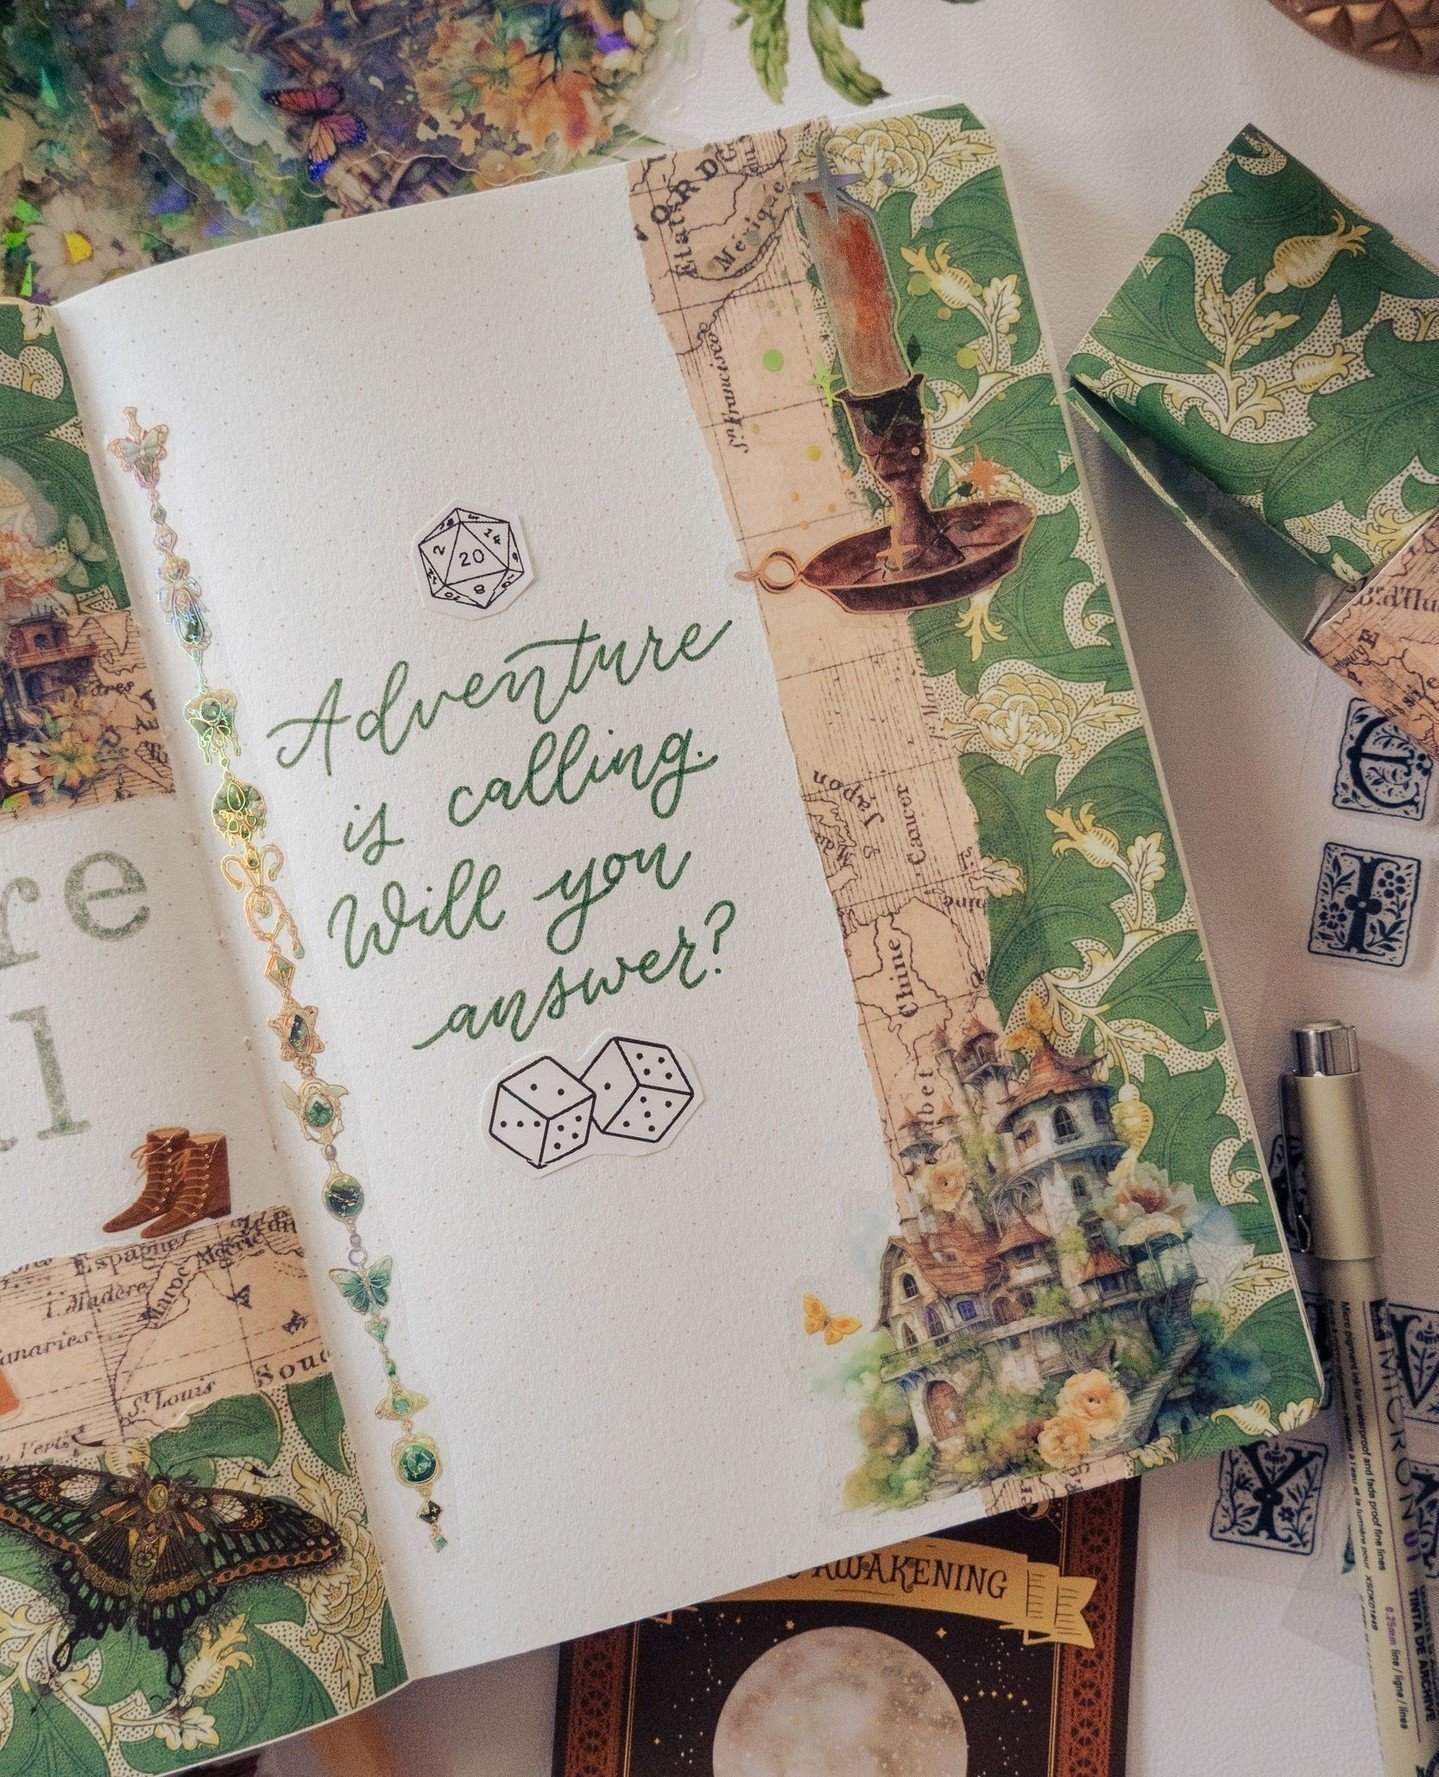 Are you ready to go on an adventure with me? I'm running a fun immersive Adventure Journaling workshop next Saturday the 27th at @stashworldshop! ⁠
⁠
What's adventure journaling? It's like junk journaling meets the dice-roll-decision-making of D&amp;